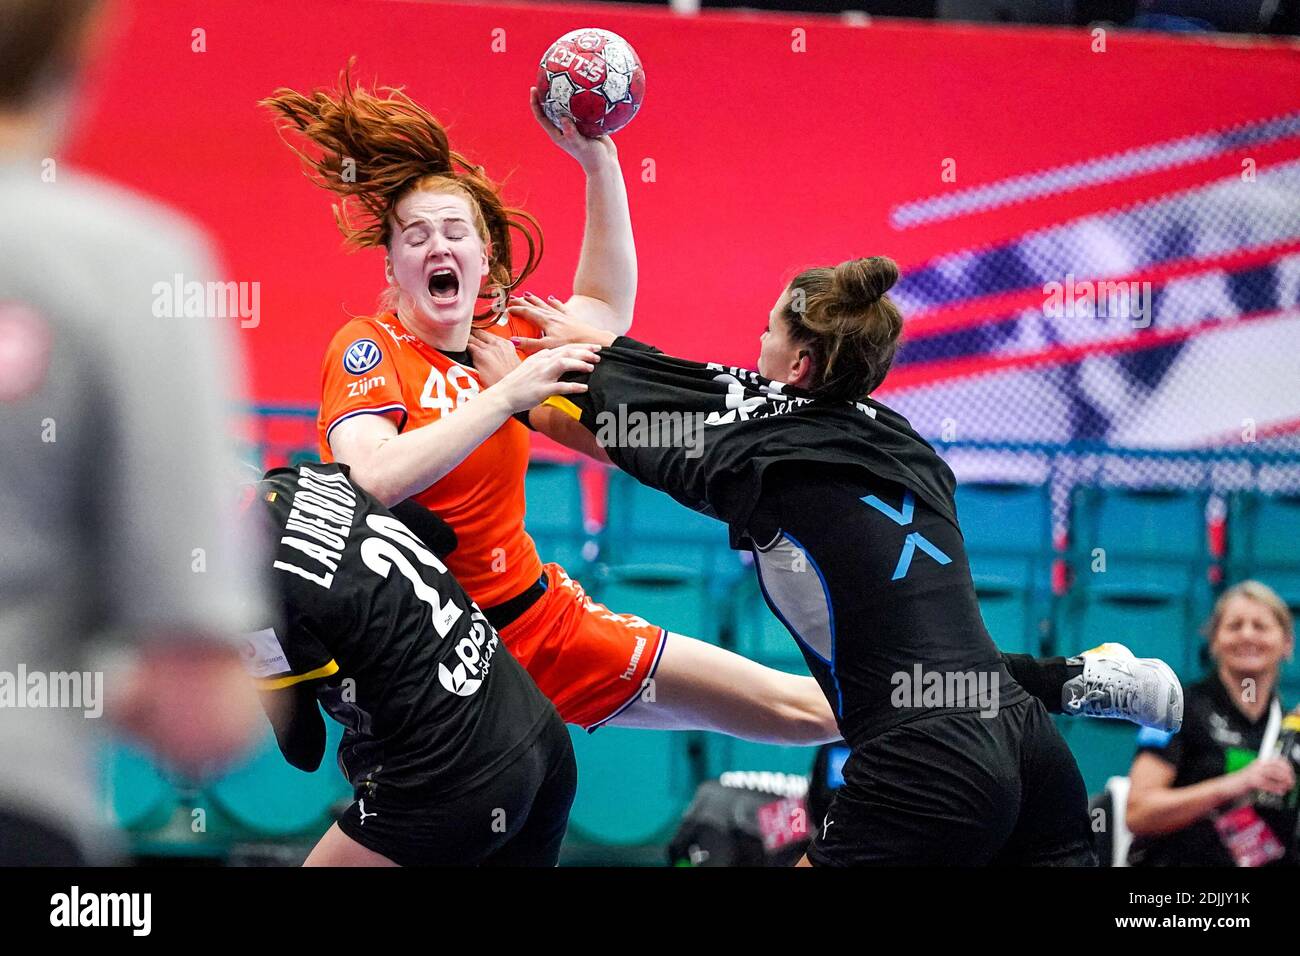 KOLDING, DENMARK - DECEMBER 14: Antje Lauenroth of Germany, Dione Housheer of Netherlands during the Women's EHF Euro 2020 match between The Netherlan Stock Photo